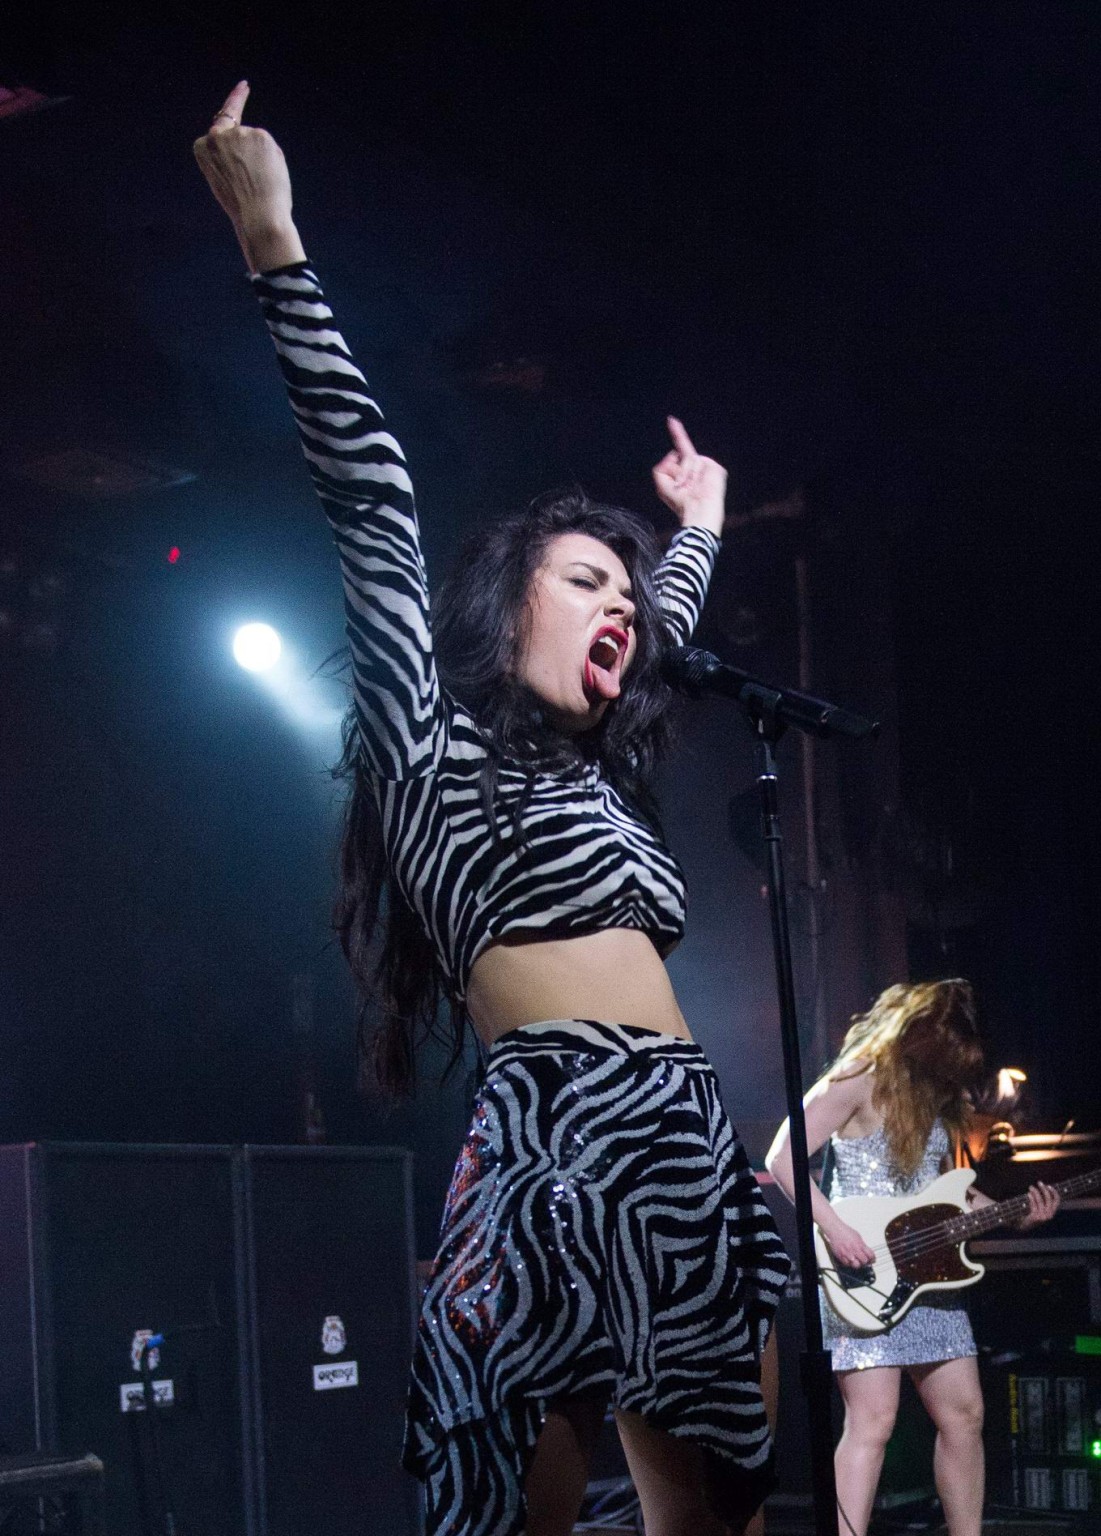 Charli XCX upskirt at the Spotify Opening Gig in London #75169023